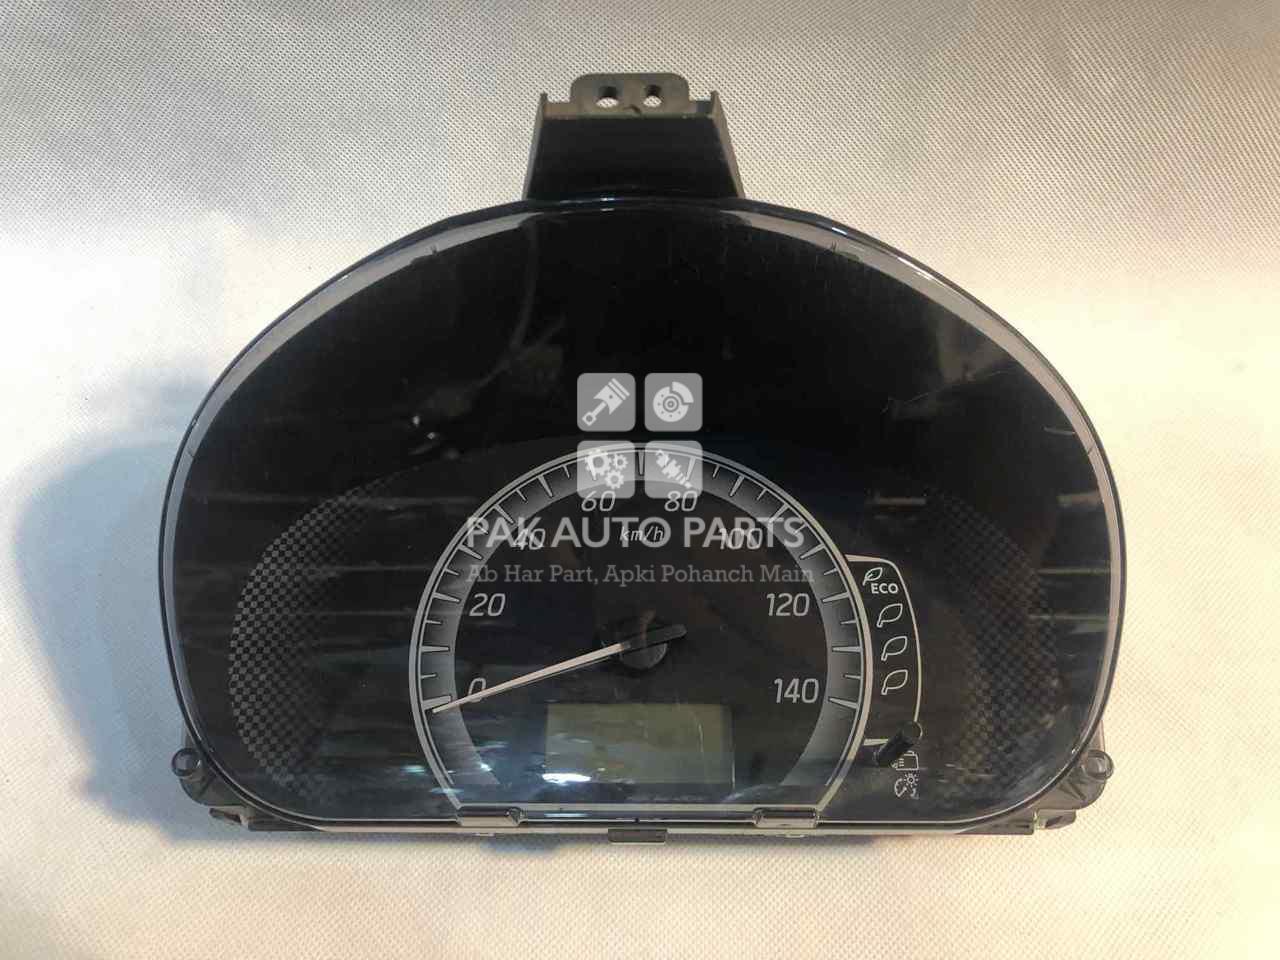 Picture of Nissan Dayz Roox 2013-14 Speedometer